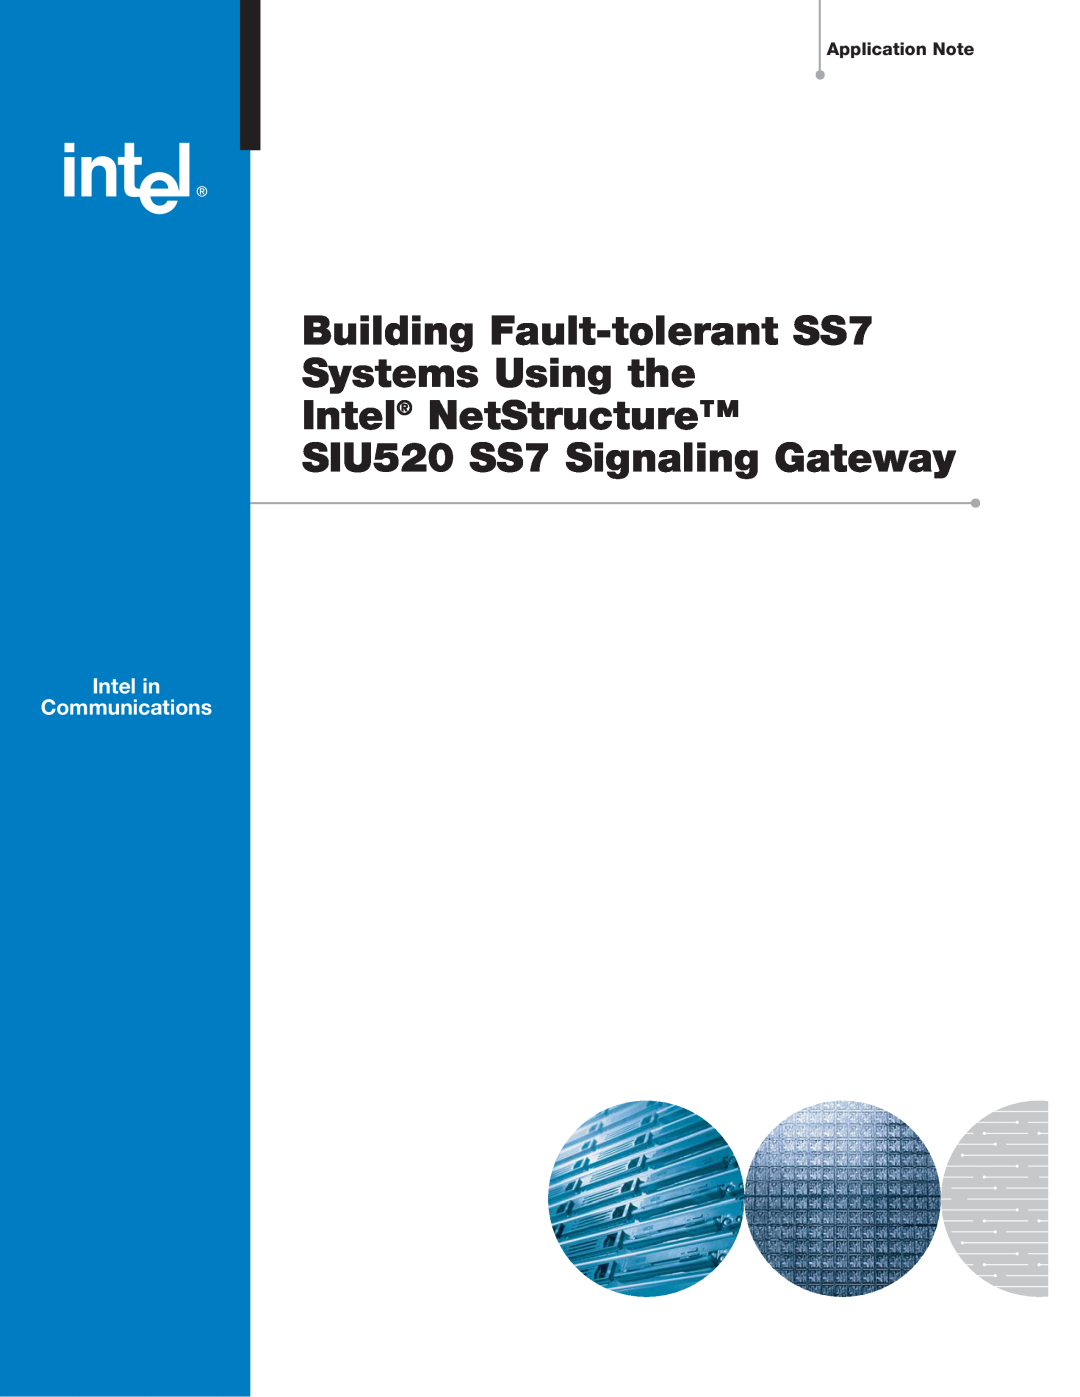 Intel SIU520 SS7 manual Application Note, Building Fault-tolerant SS7 Systems Using the Intel NetStructure 